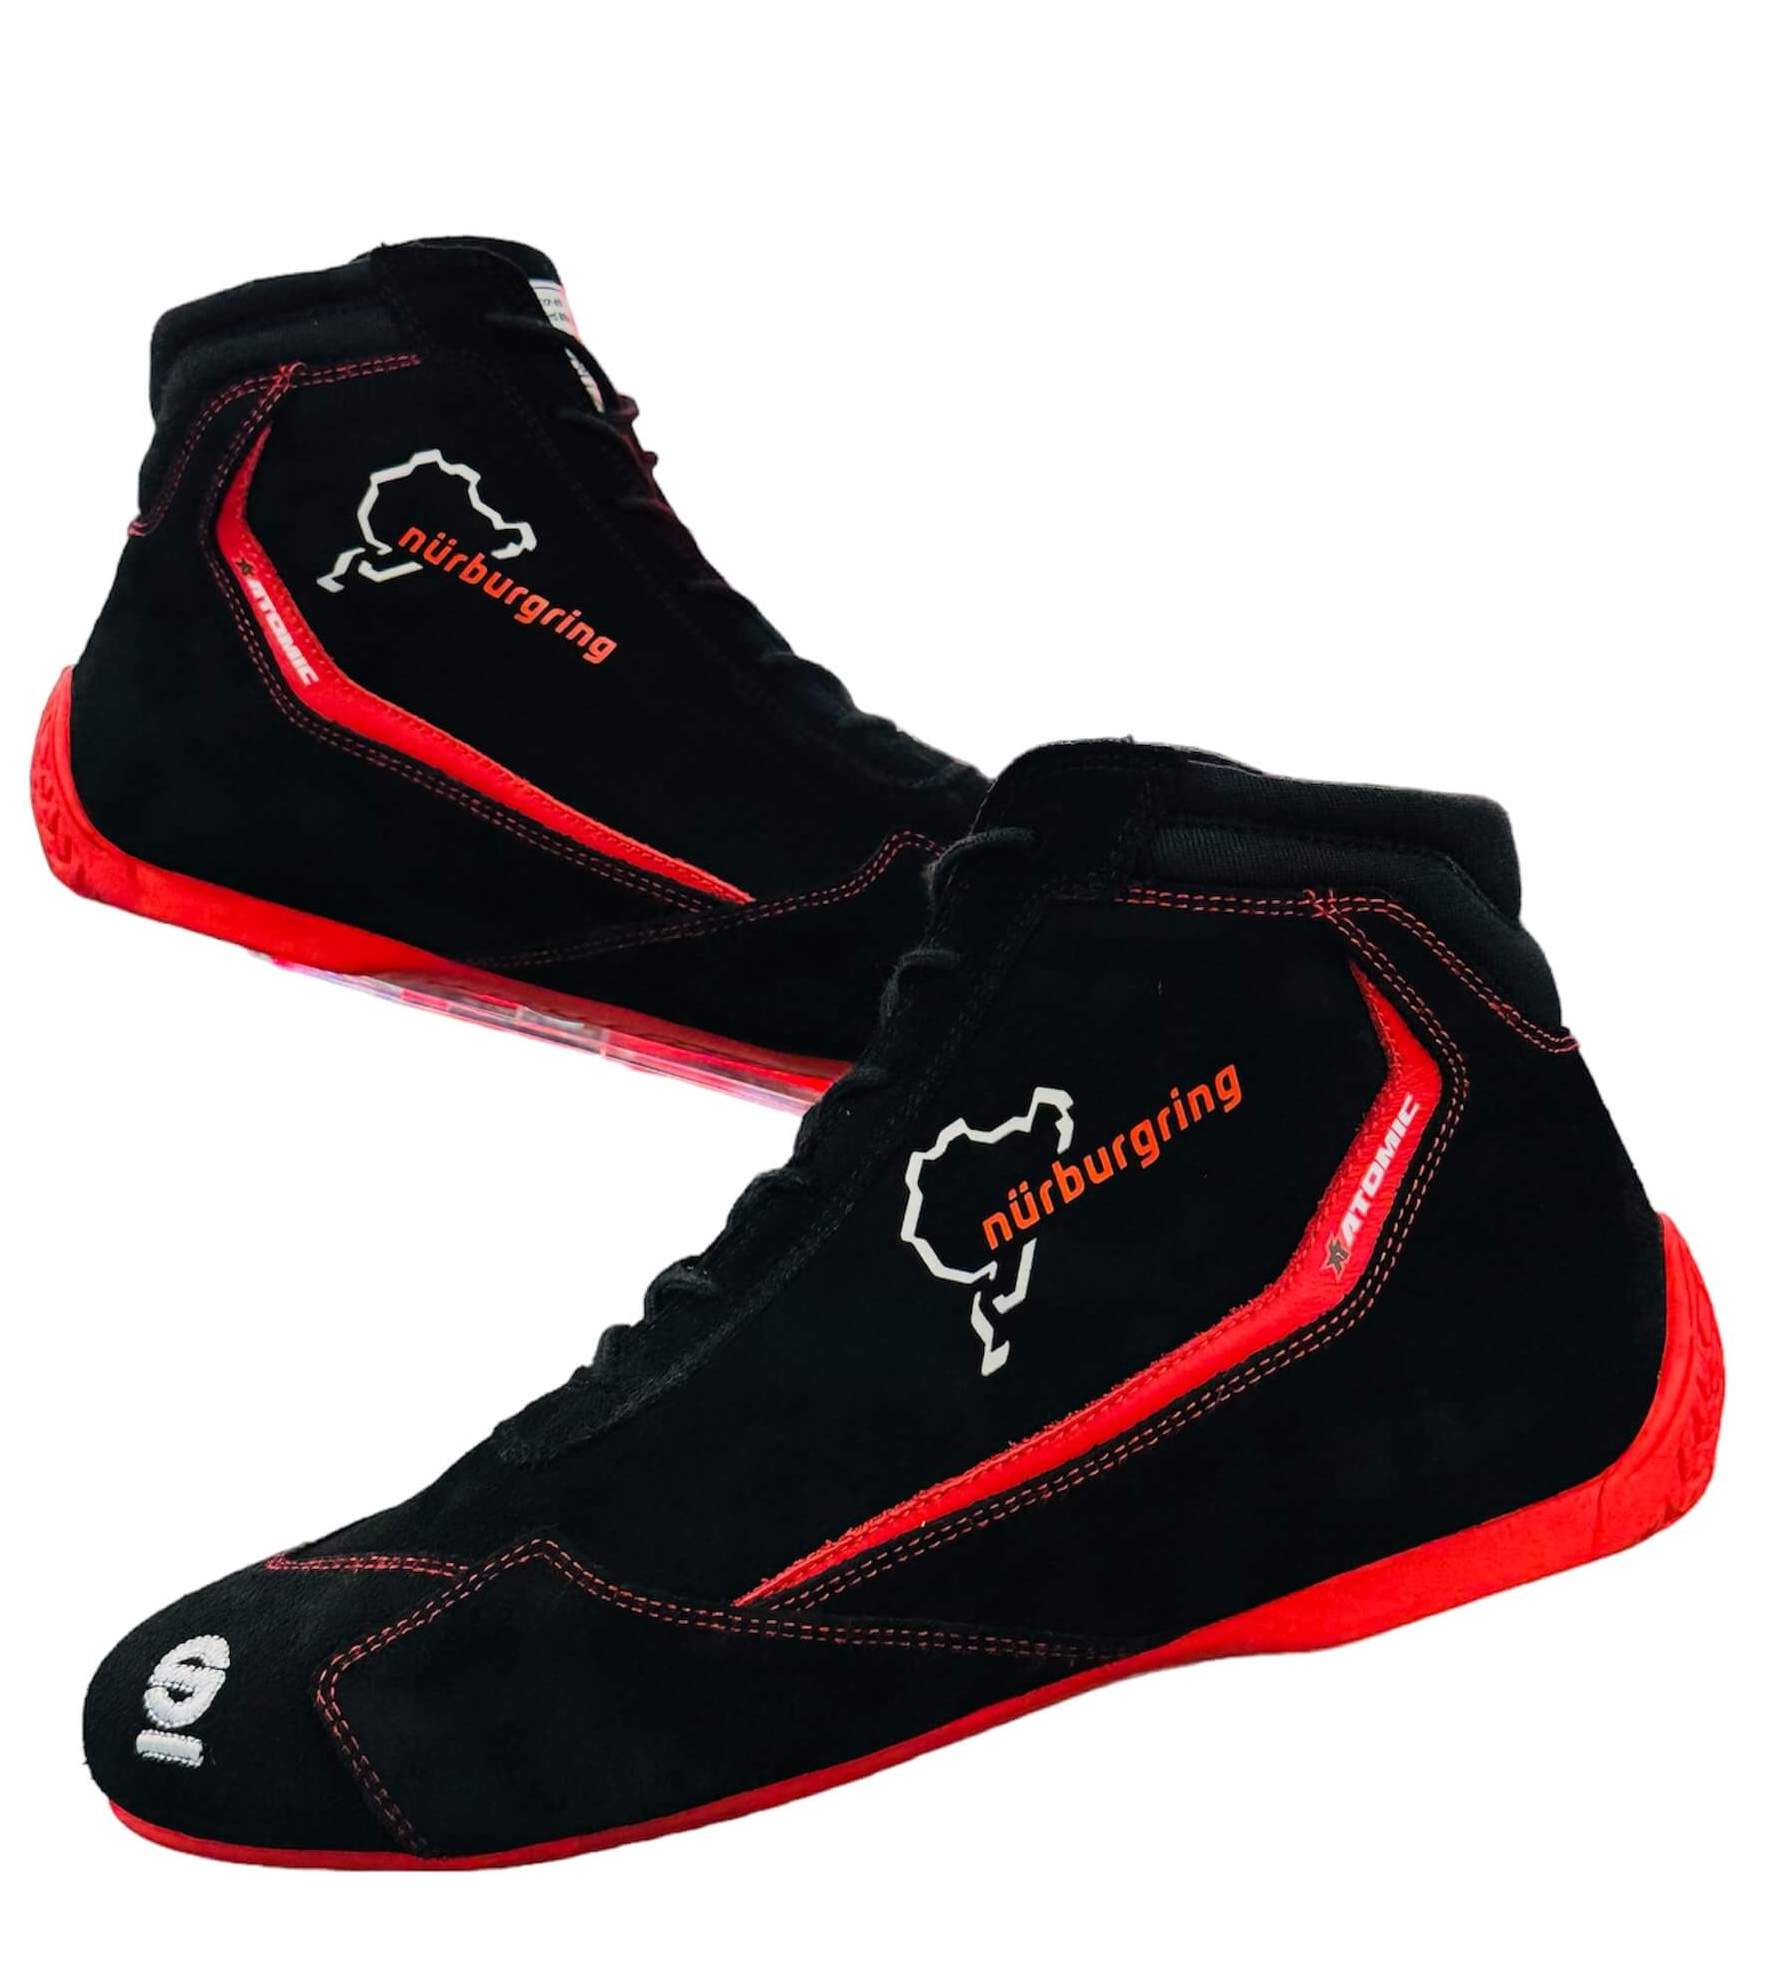 SPARCO 001295SP_NBR44 Shoes Slalom Nurburgring Edition black/red Size 44 Photo-3 